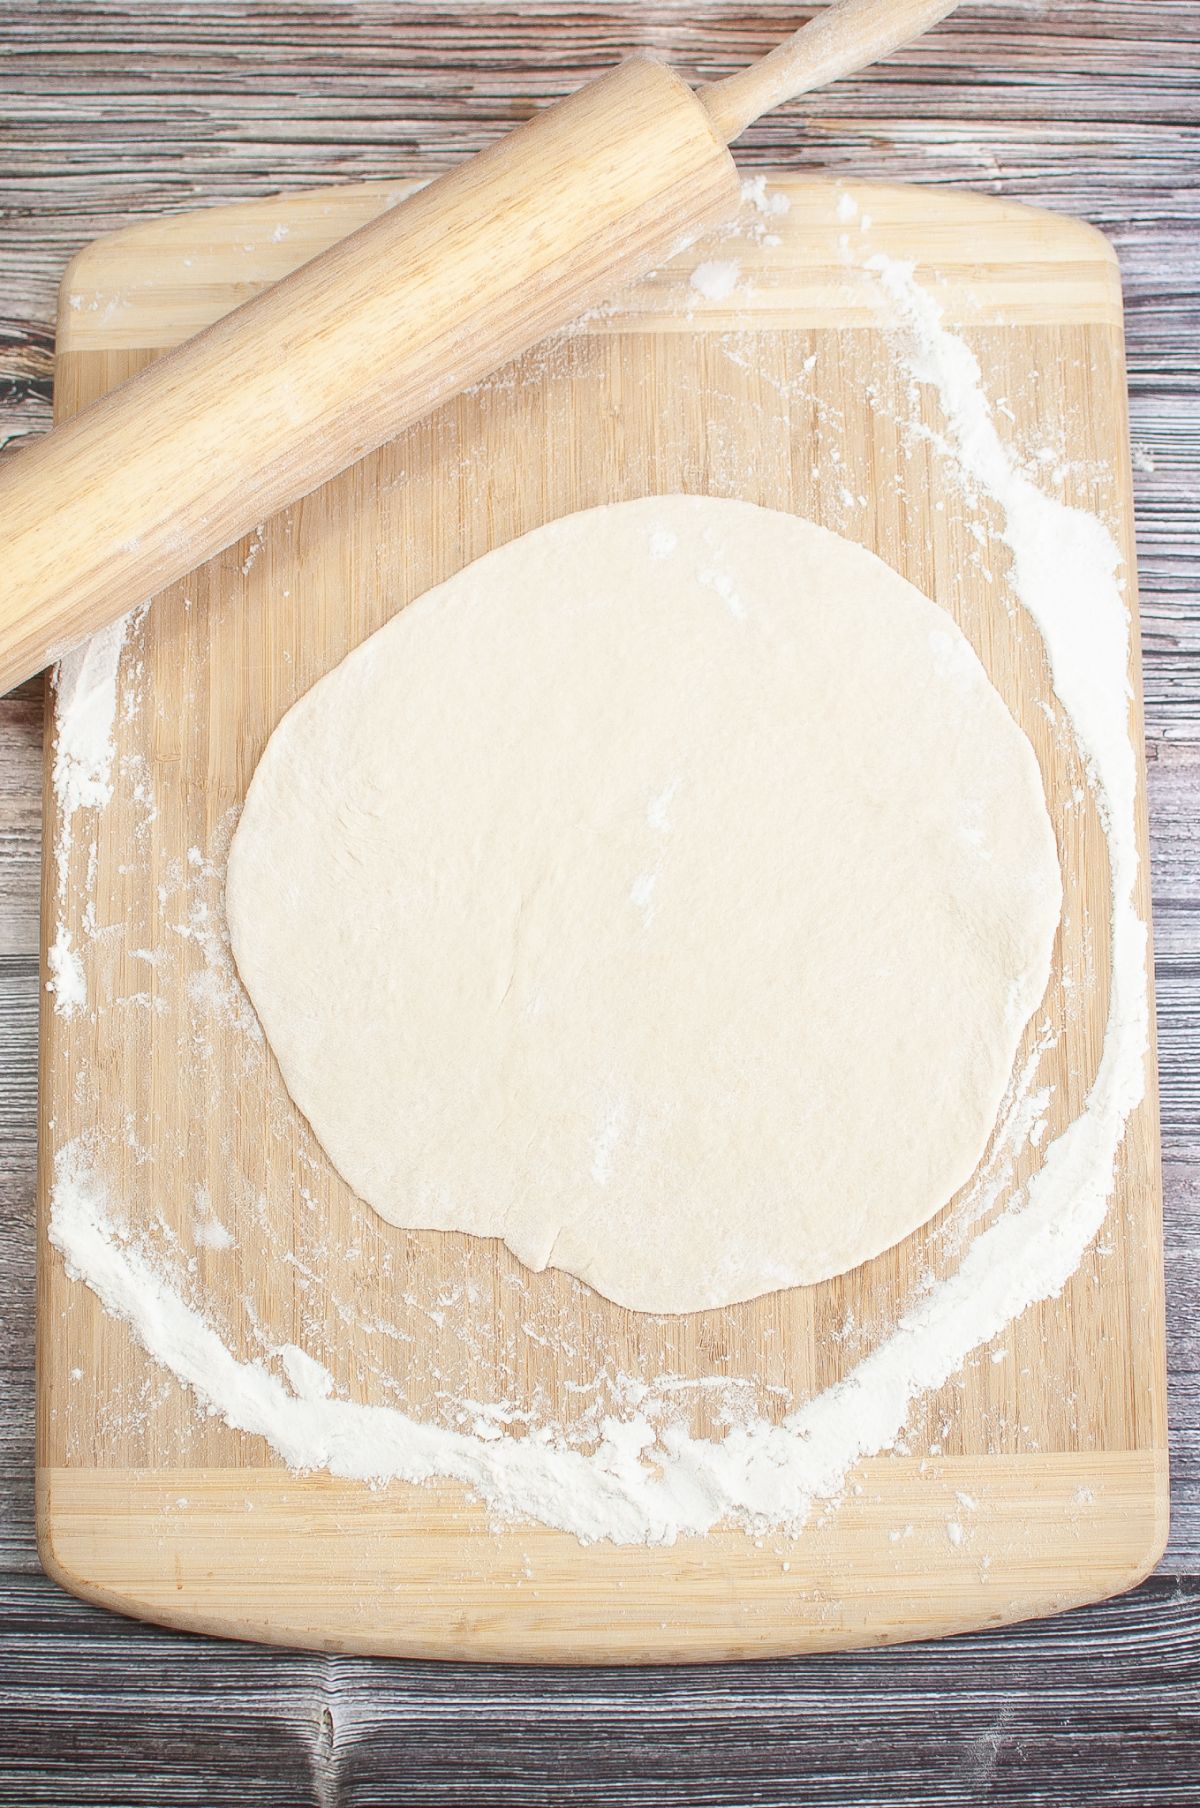 Rolled out dough on a wooden chopping board with rolling pin on the side.